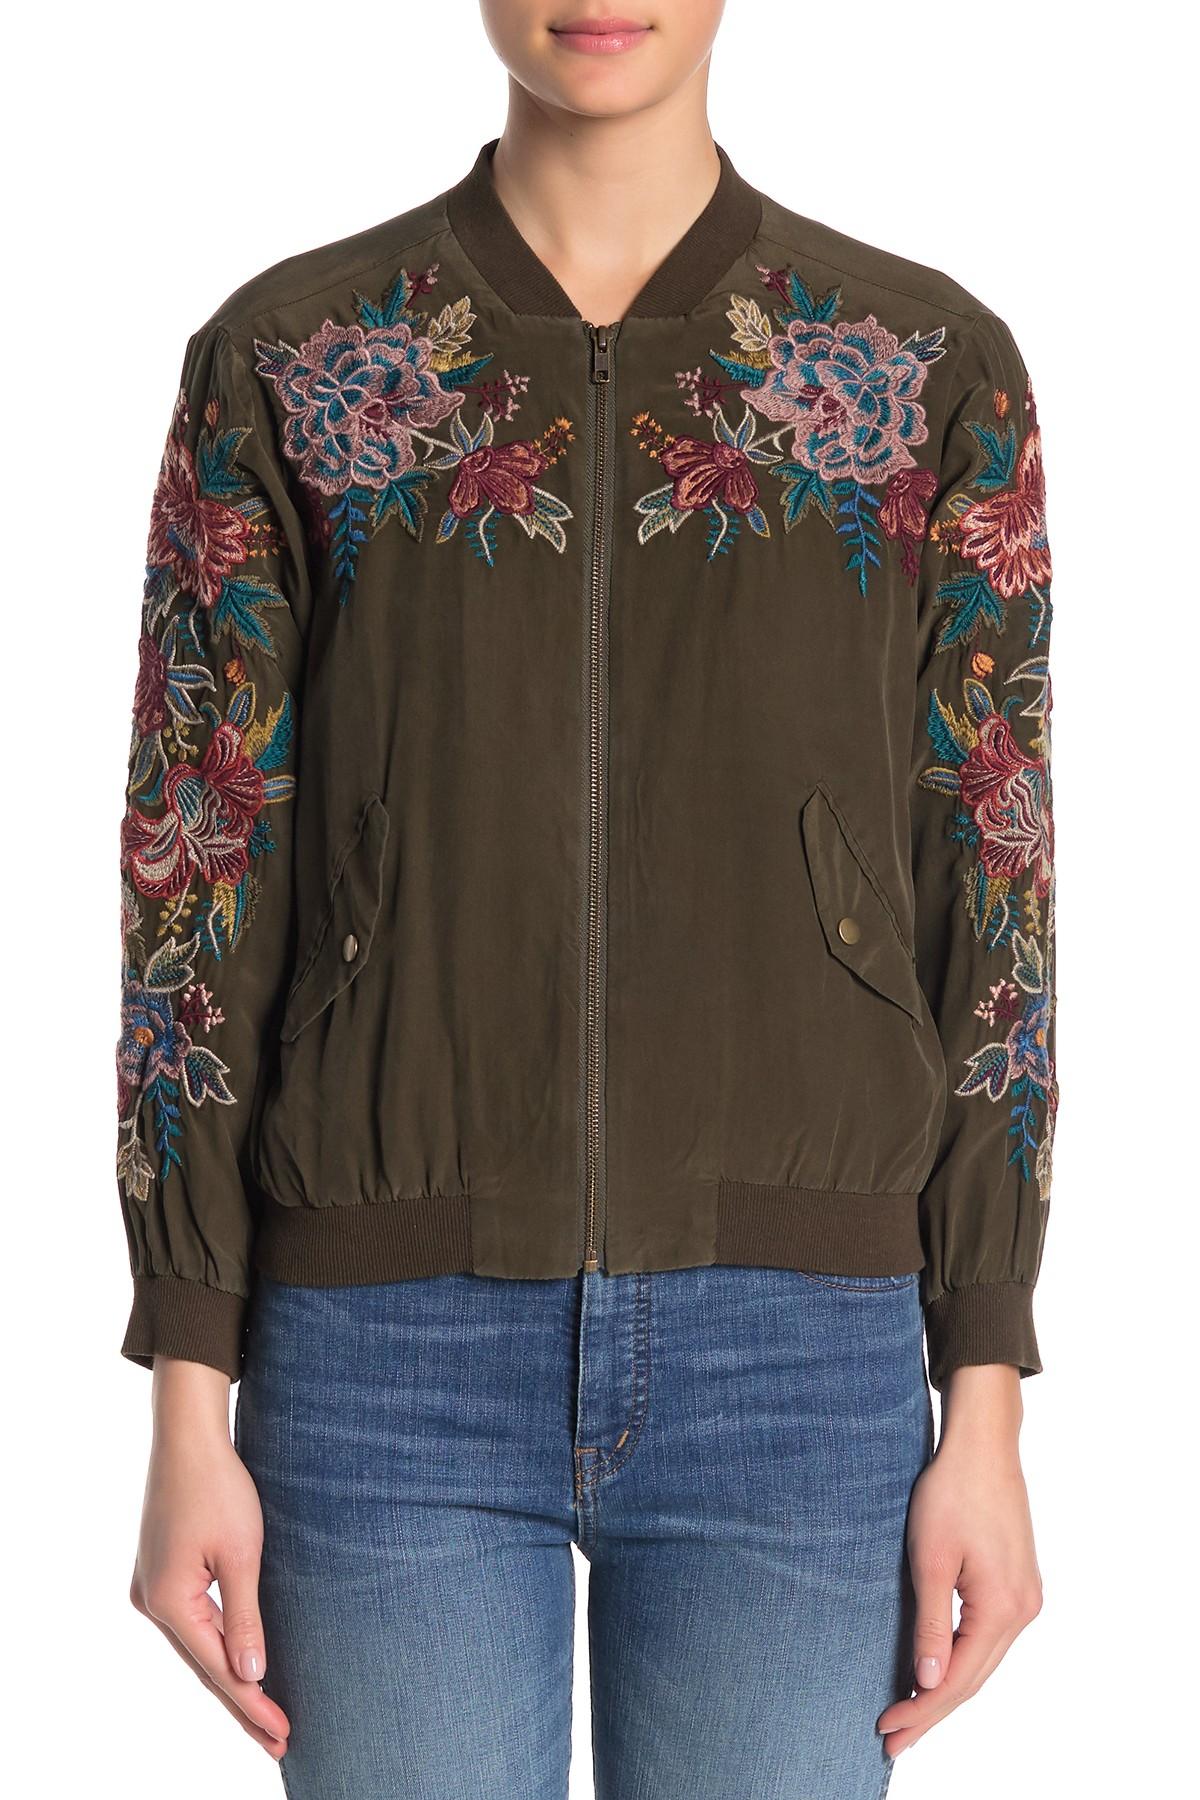 Johnny Was Tyrell Silk Floral Embroidered Bomber Jacket - Lyst